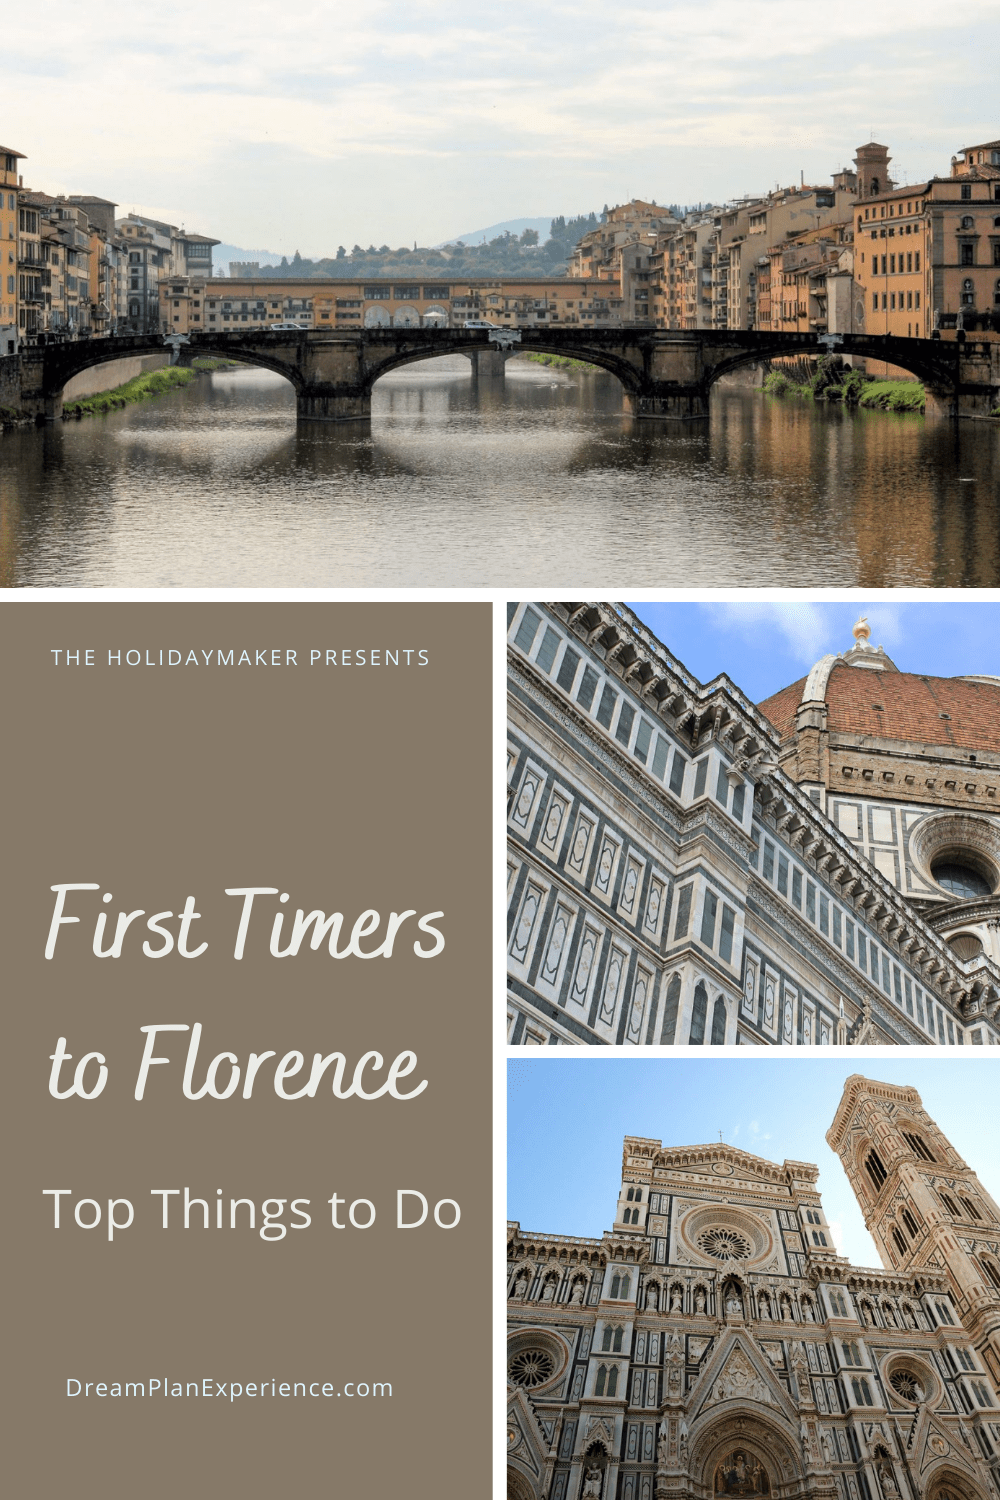 Florence is a romantic Renaissance city in Tuscany Italy. It is known for its art and architecture with many must see cathedrals, palaces, piazzas and bridges.